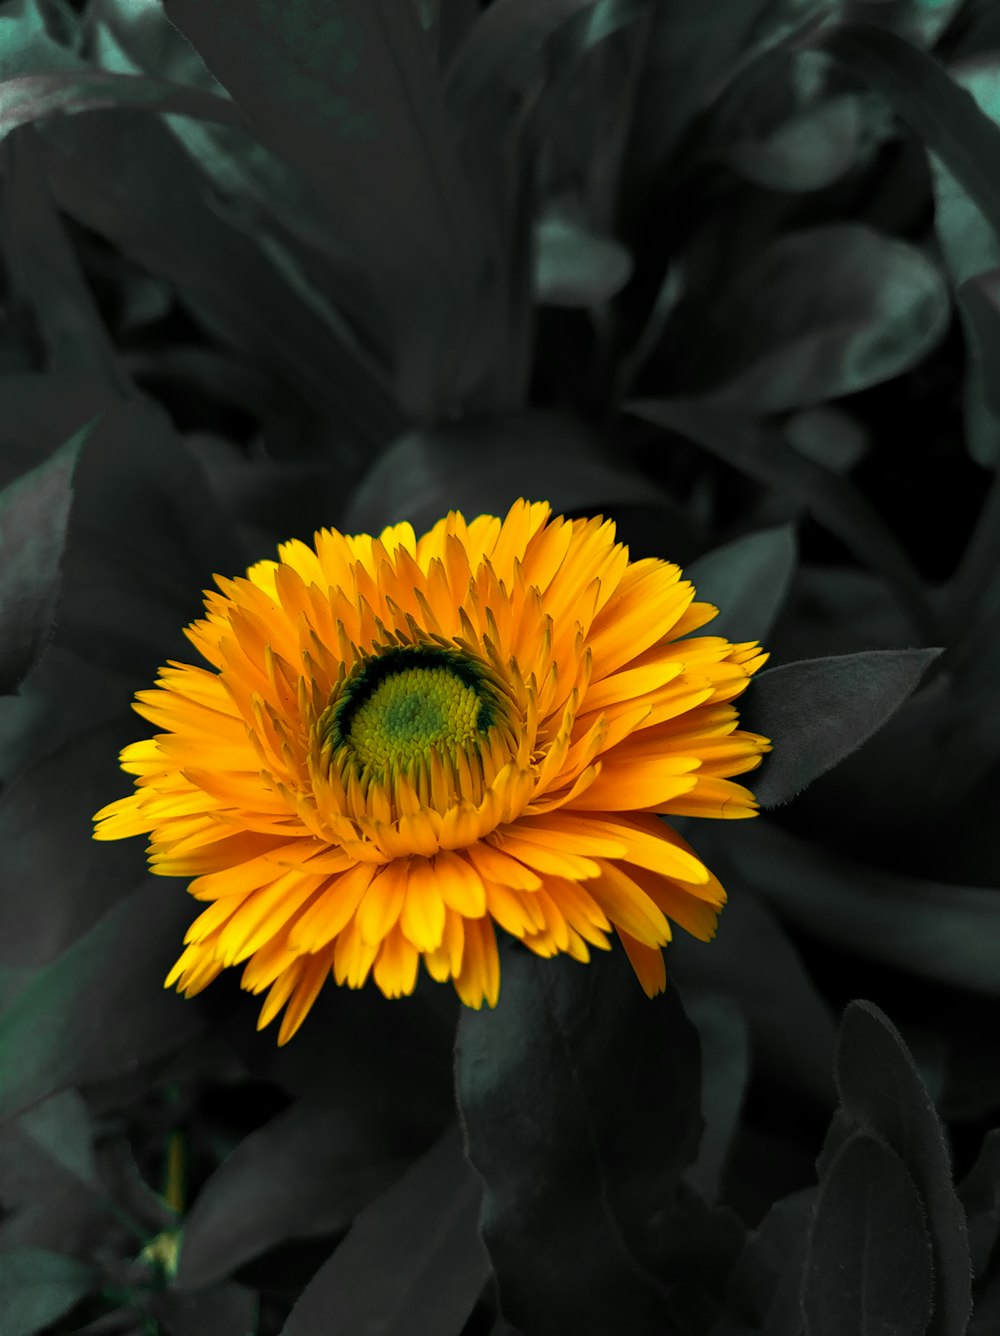 a yellow flower with a green center surrounded by black leaves